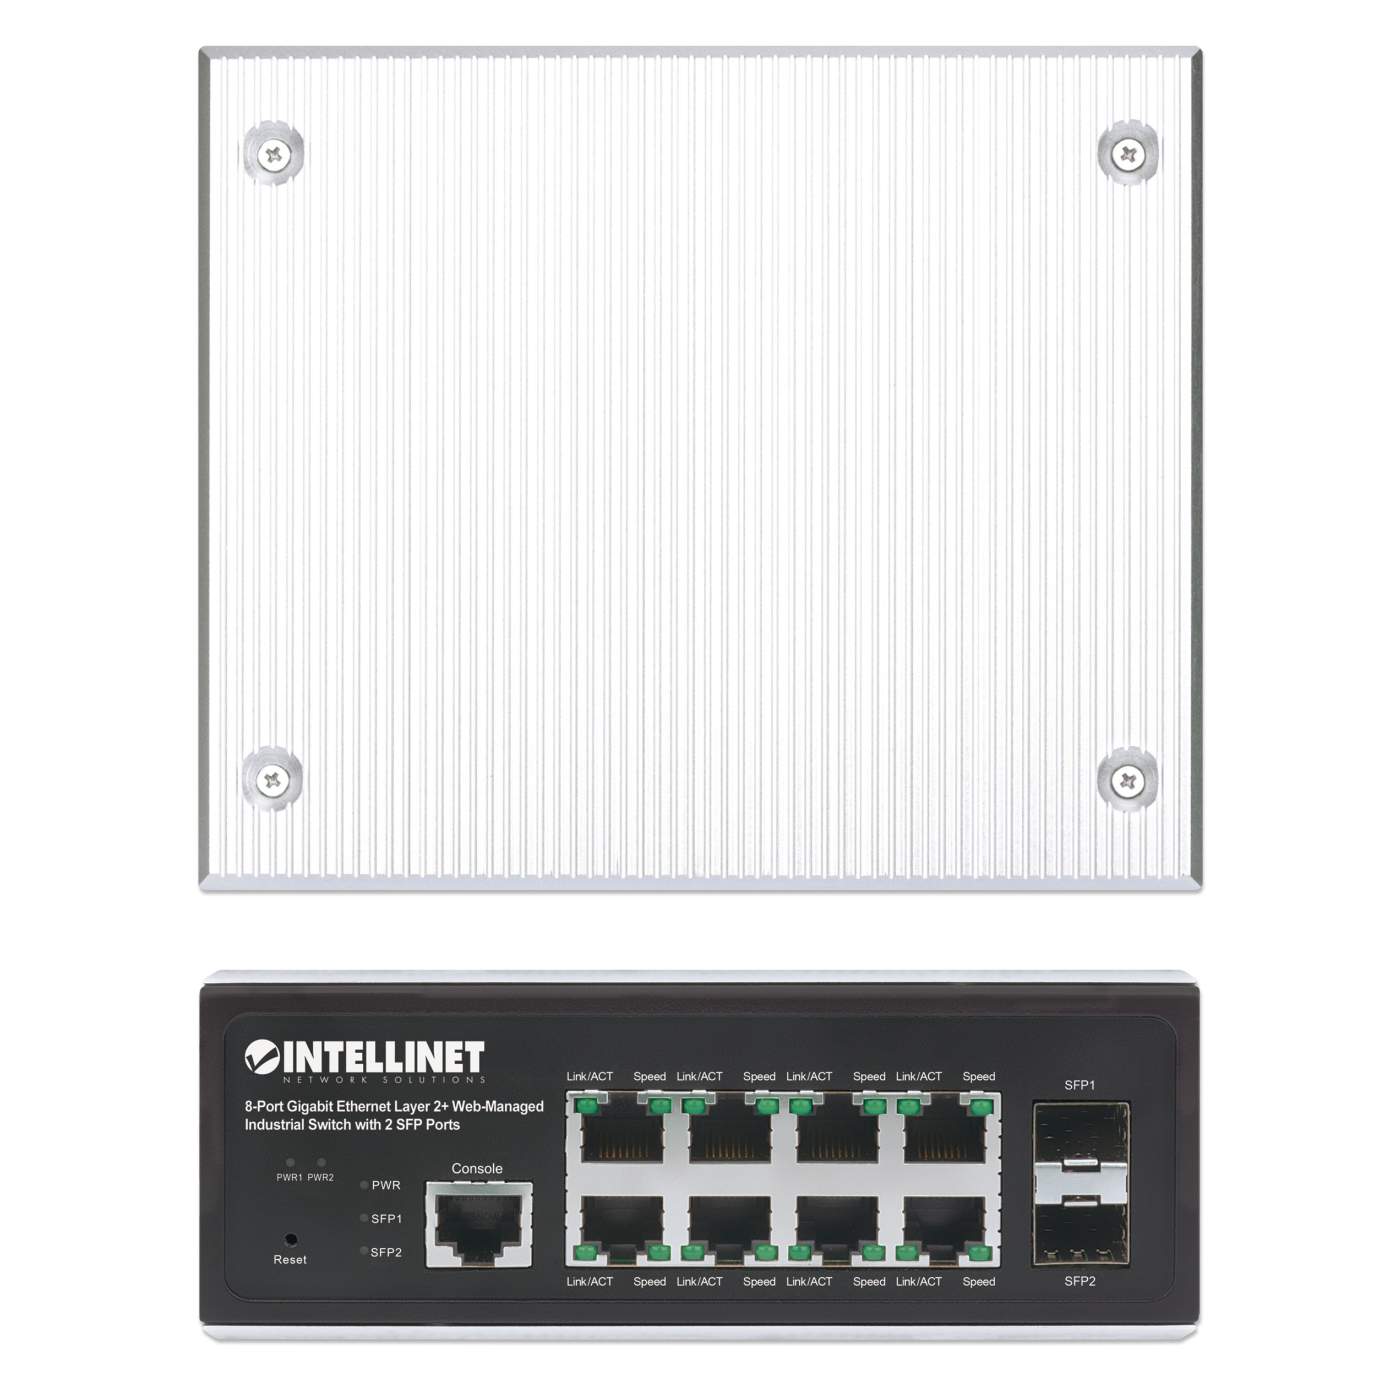 Industrial 8-Port Gigabit Ethernet Layer 2+ Web-Managed Switch with 2 SFP Ports Image 6